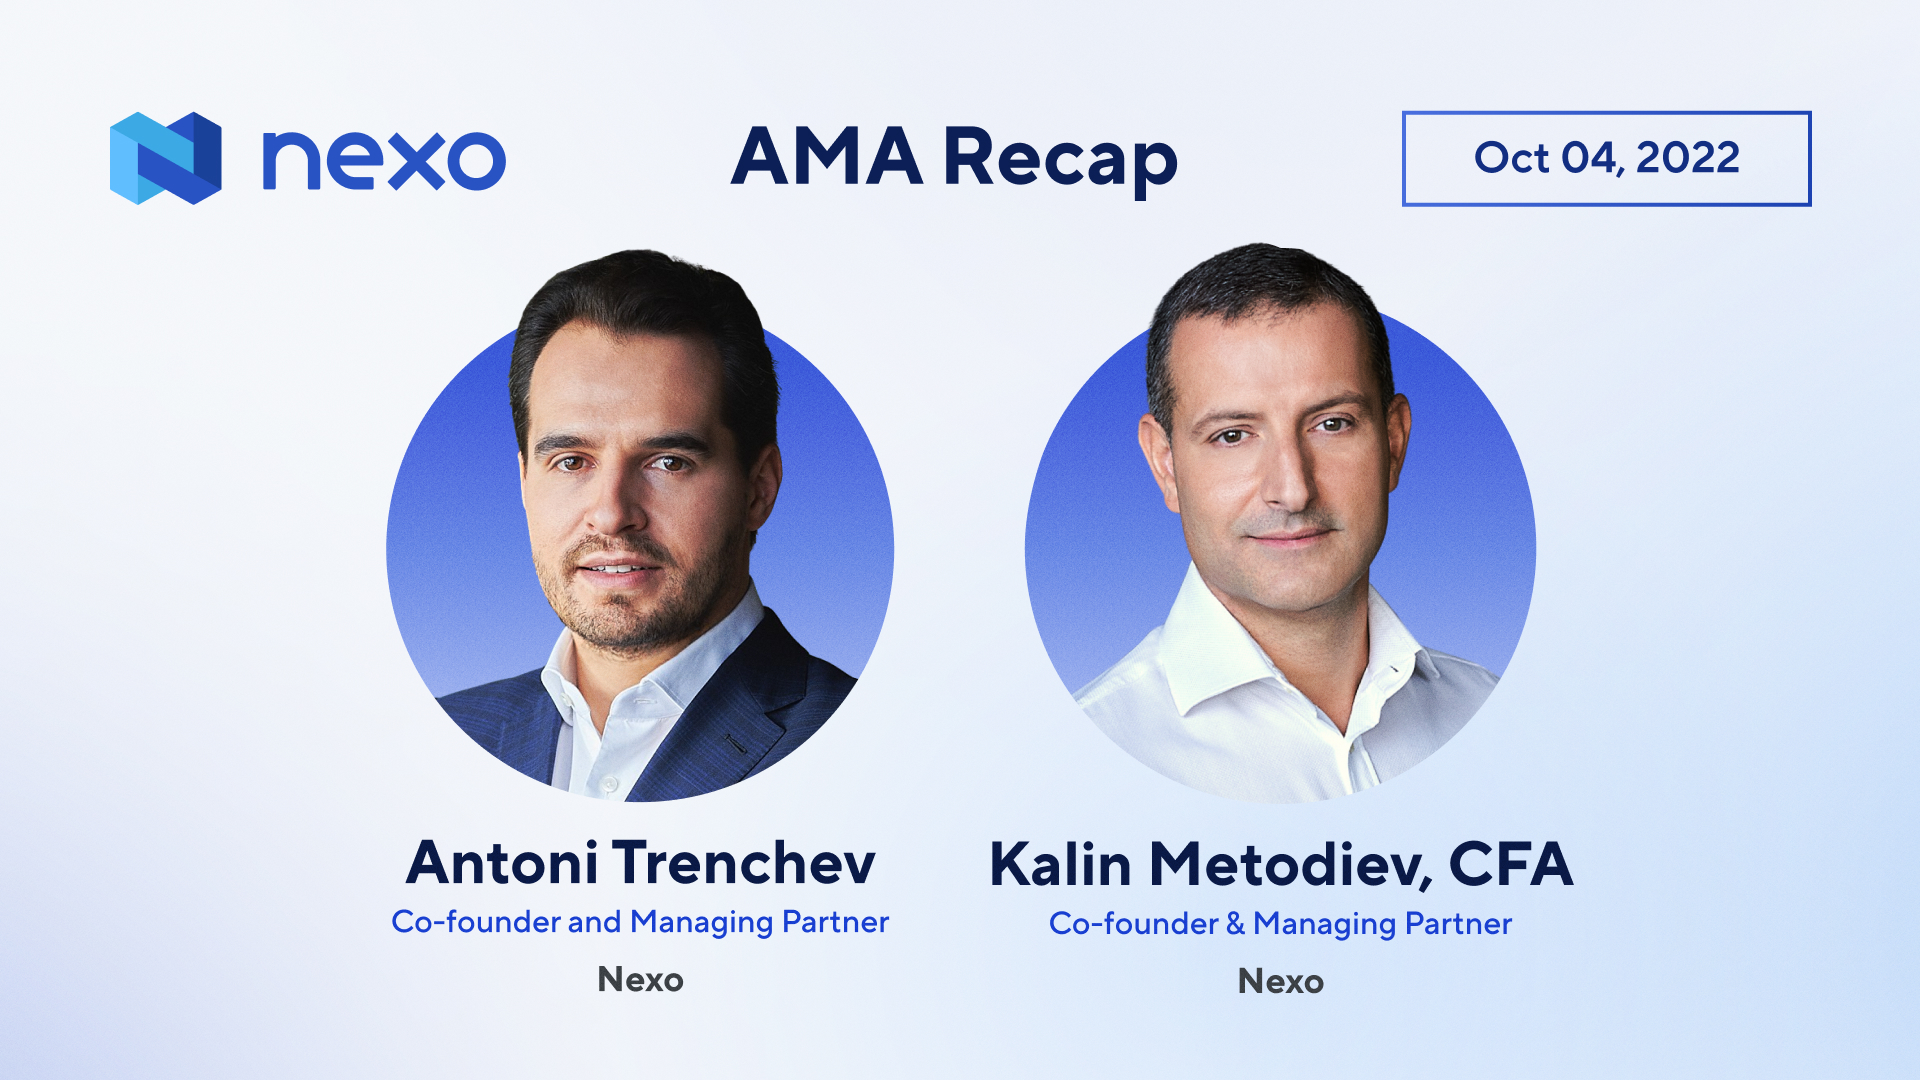 October AMA Recap: Q&A and Key Messages from Nexo